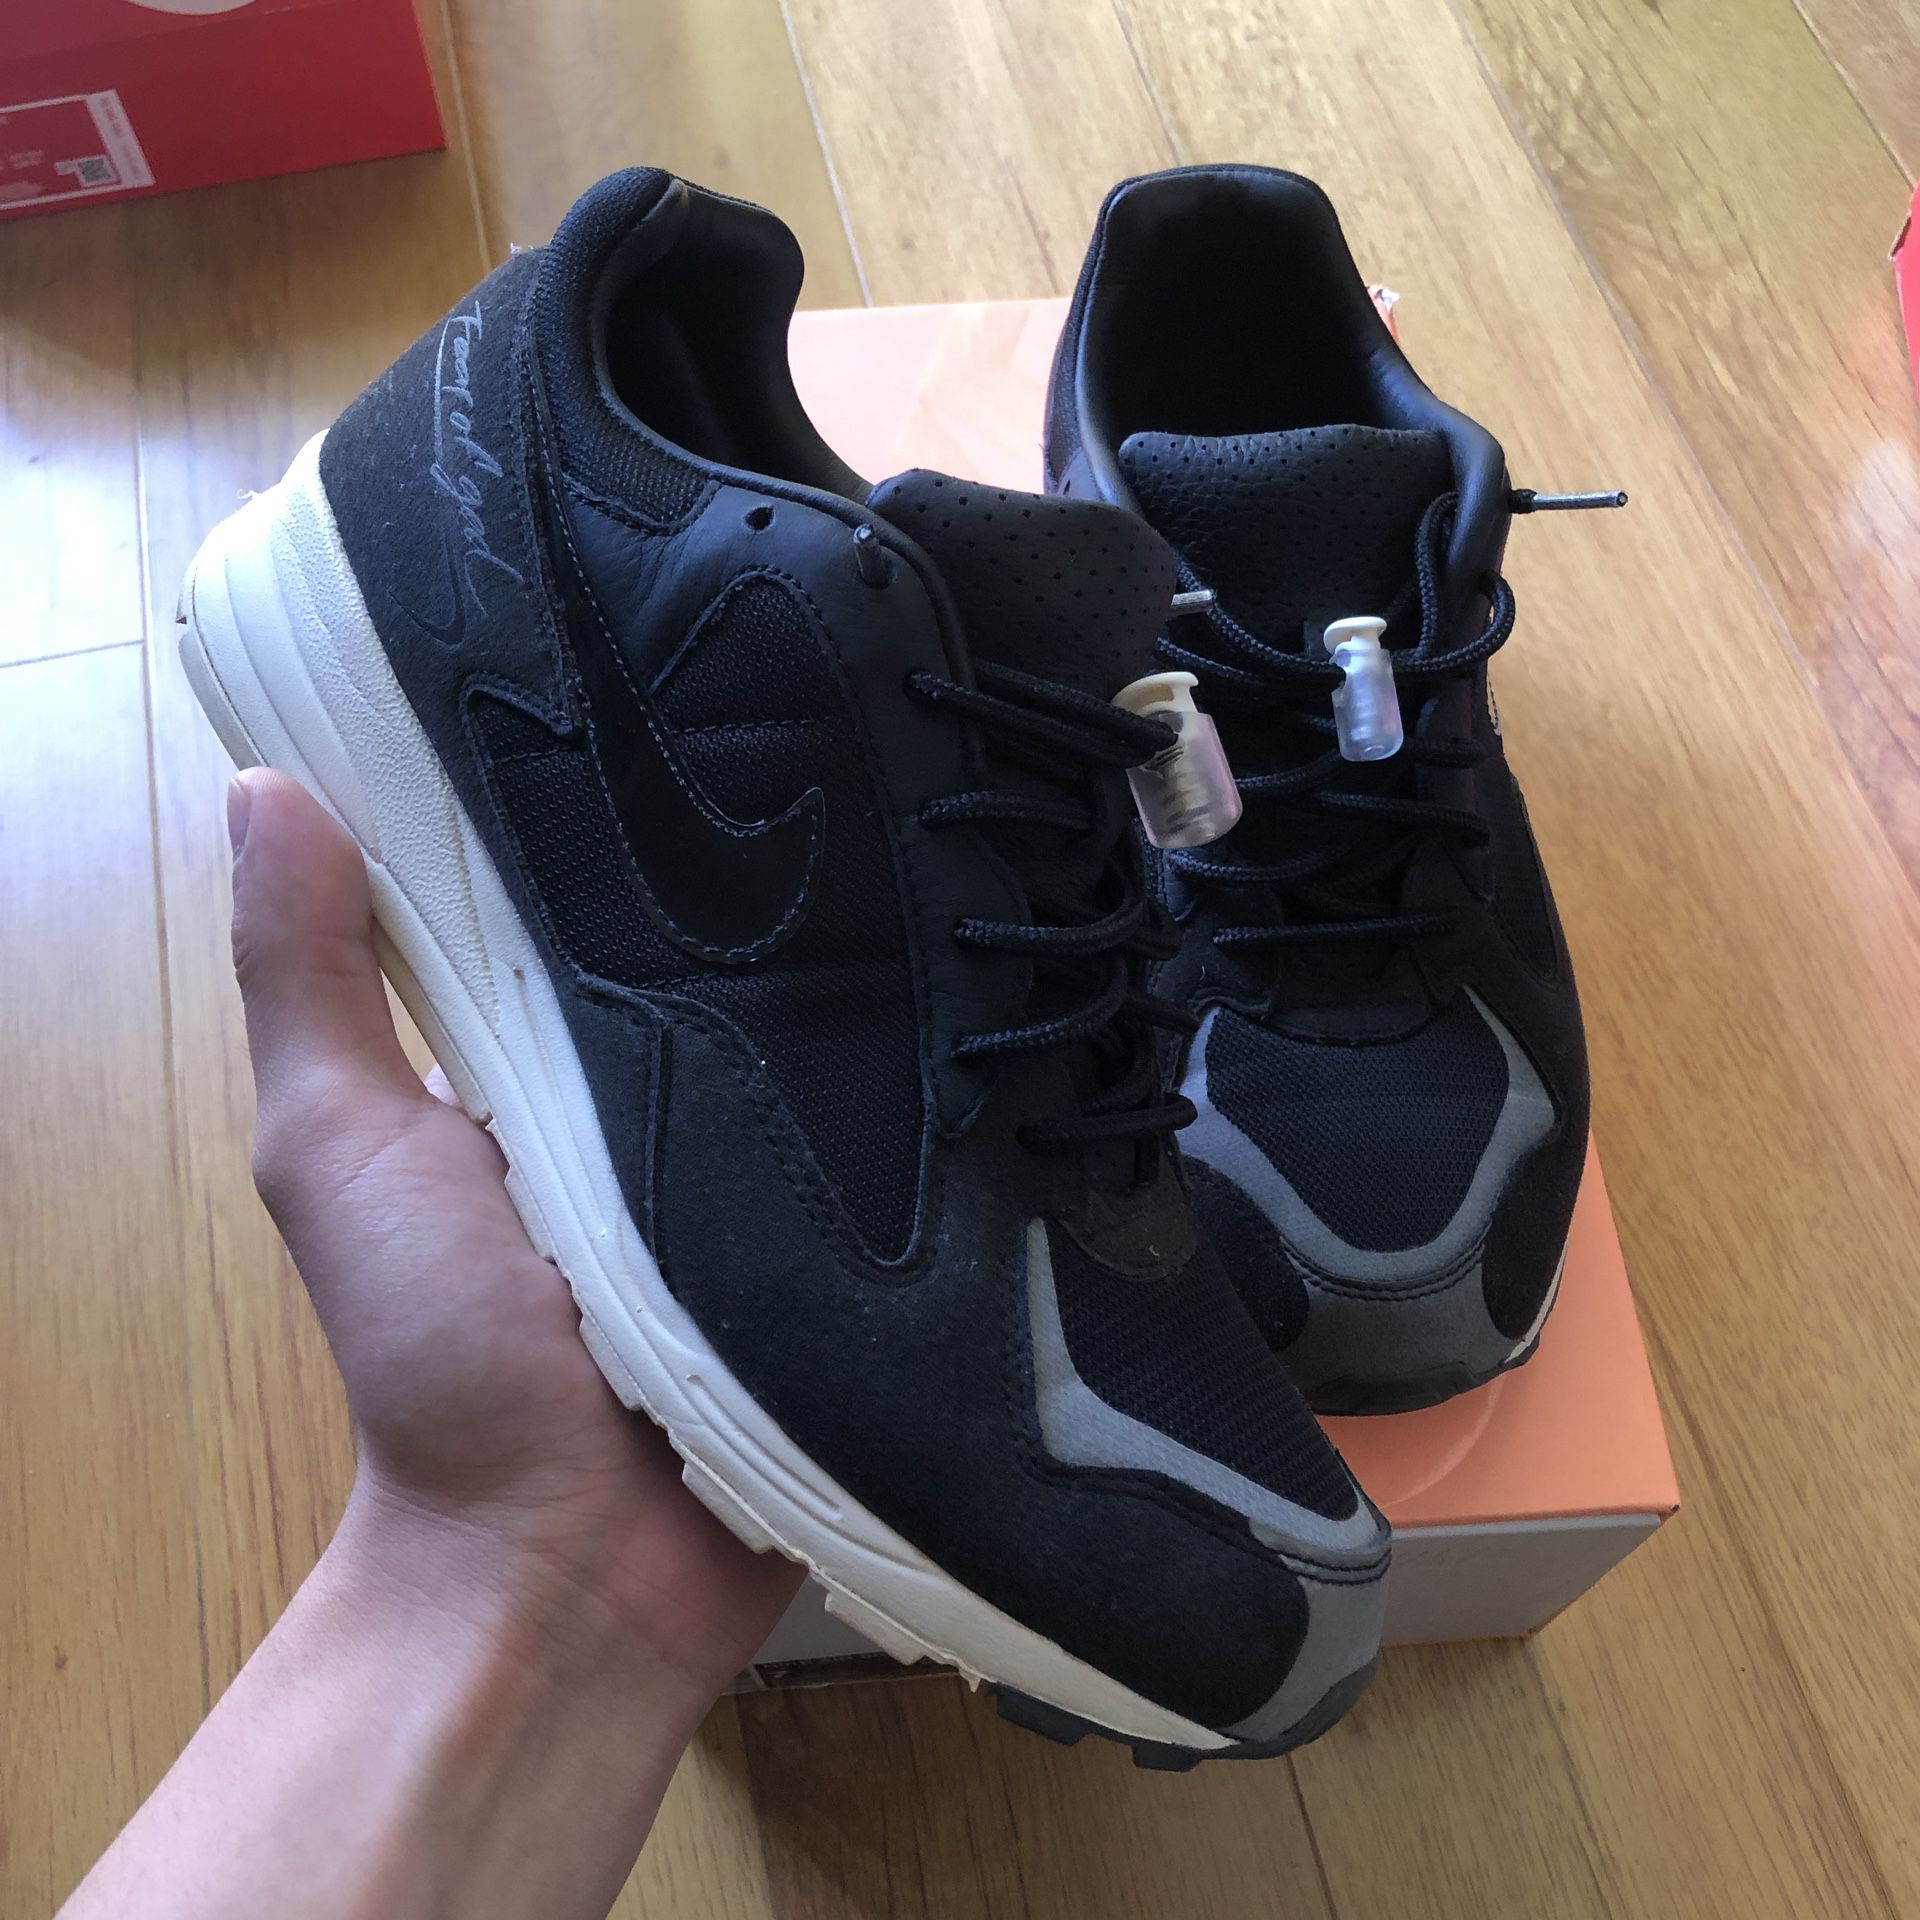 Nike Air Skylon 2 Fear Of God Black Sail Sale in City Of Industry, CA - OfferUp